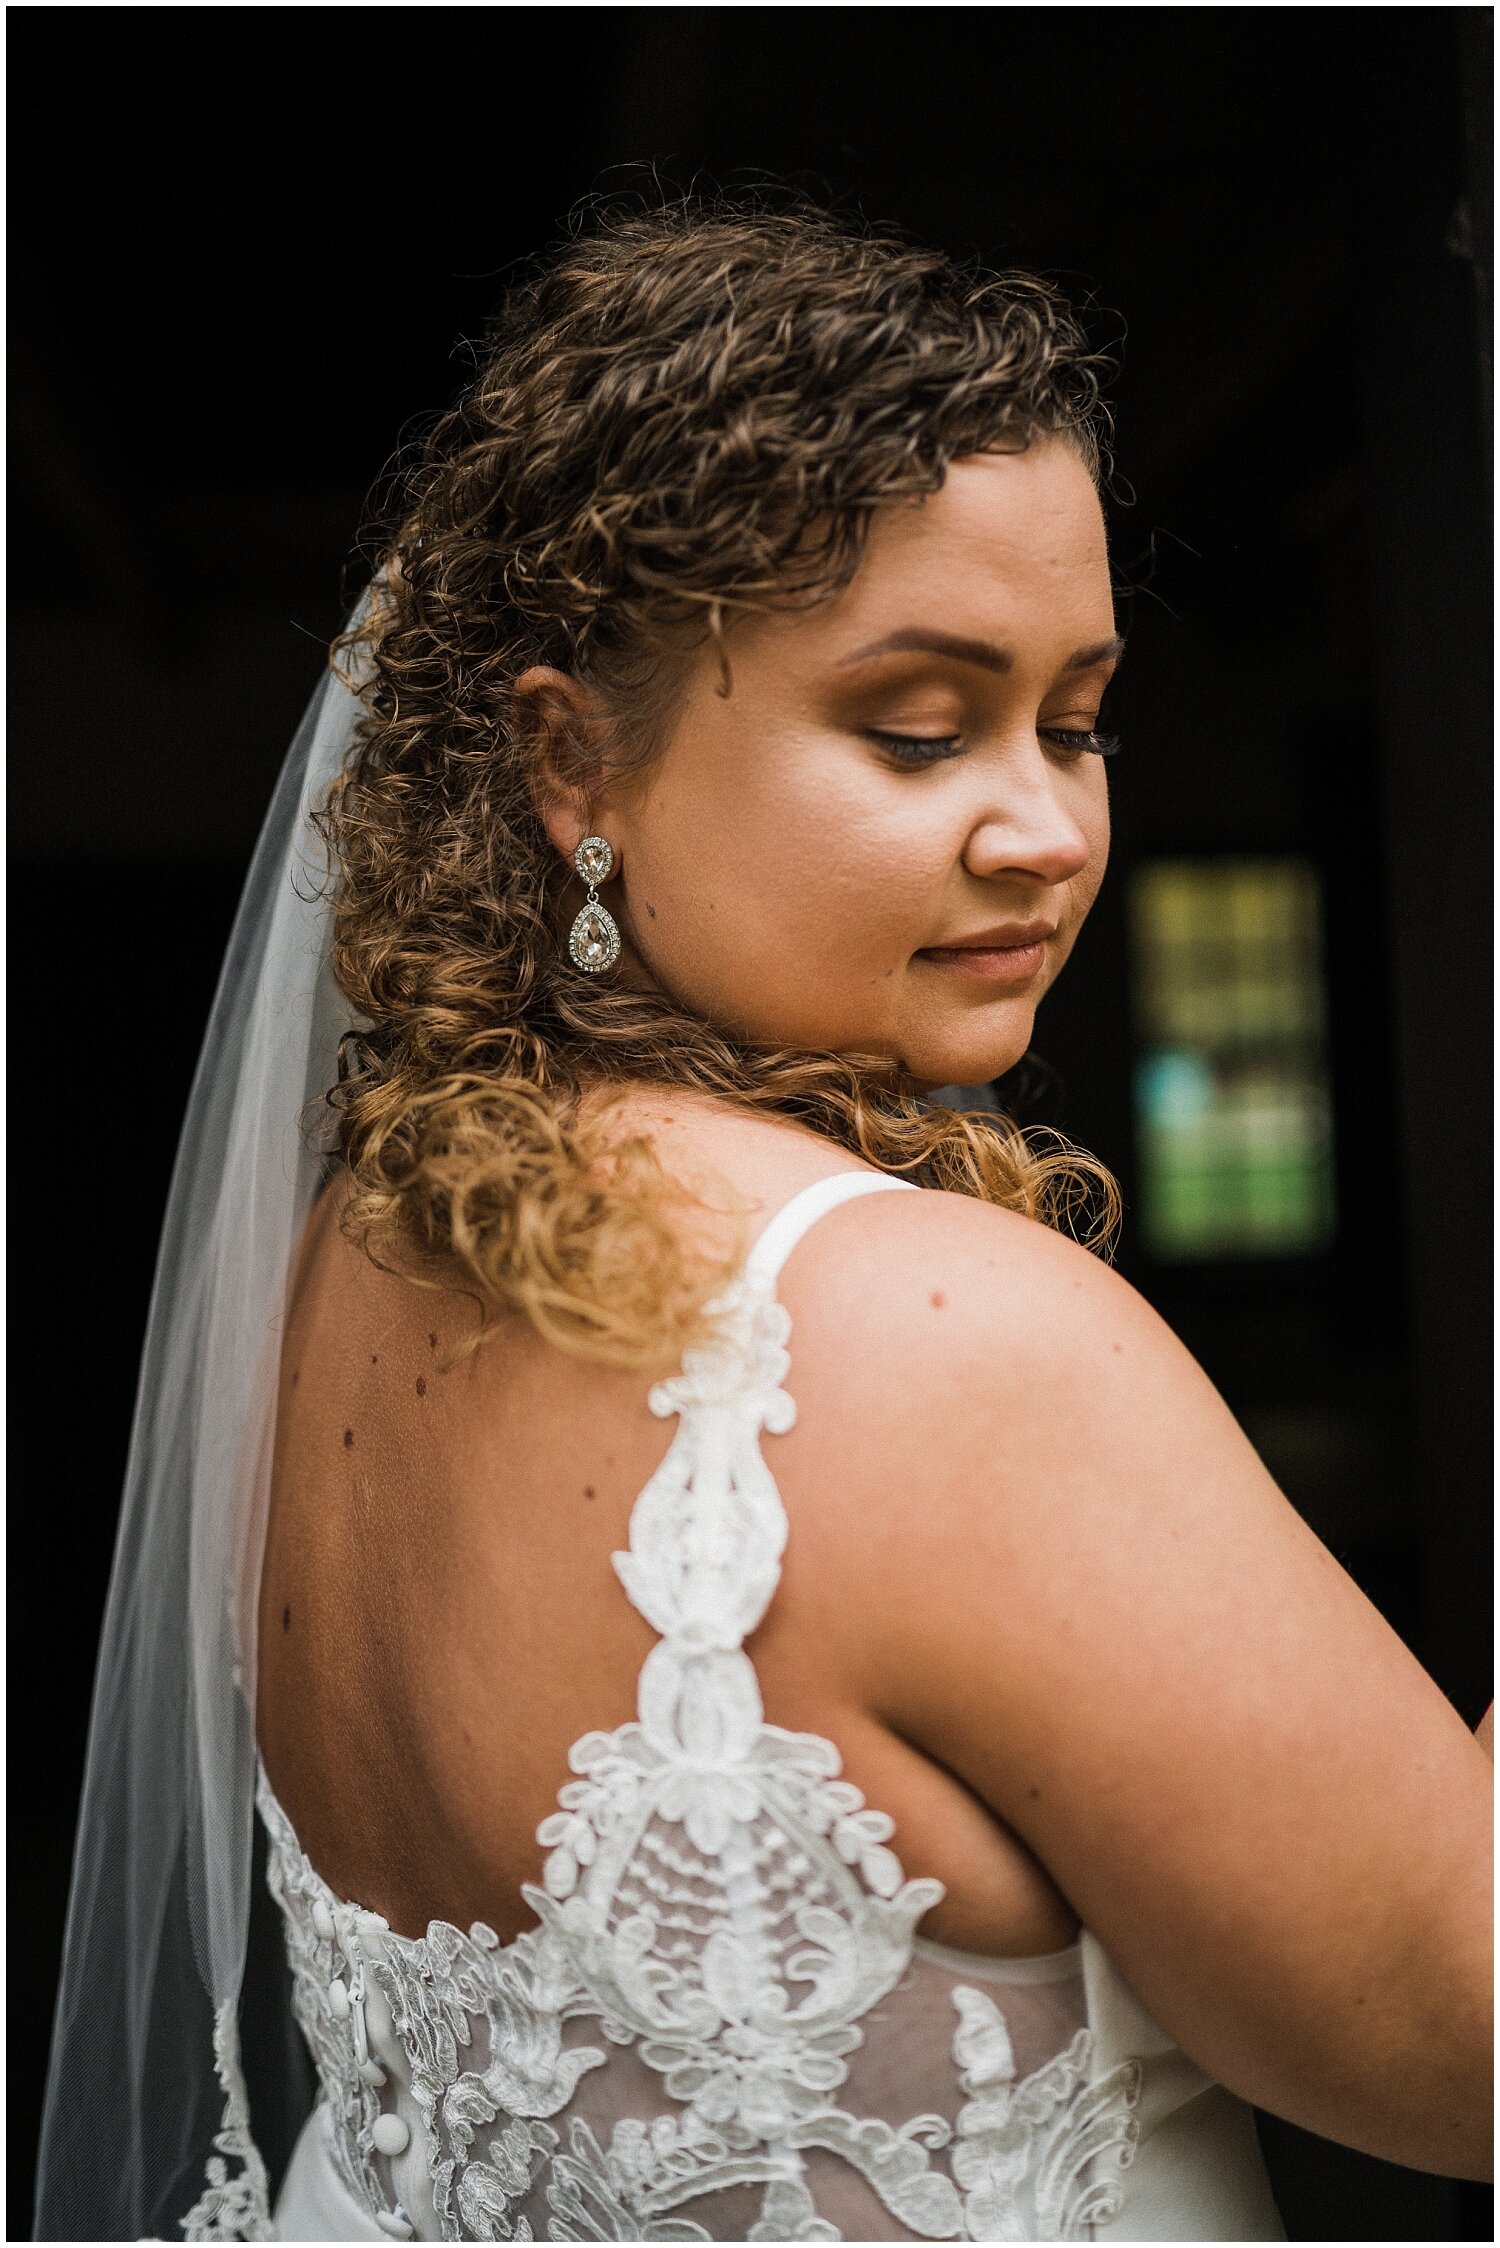 Carillon Historical Park &amp; Brewery Wedding | Kettering, OH